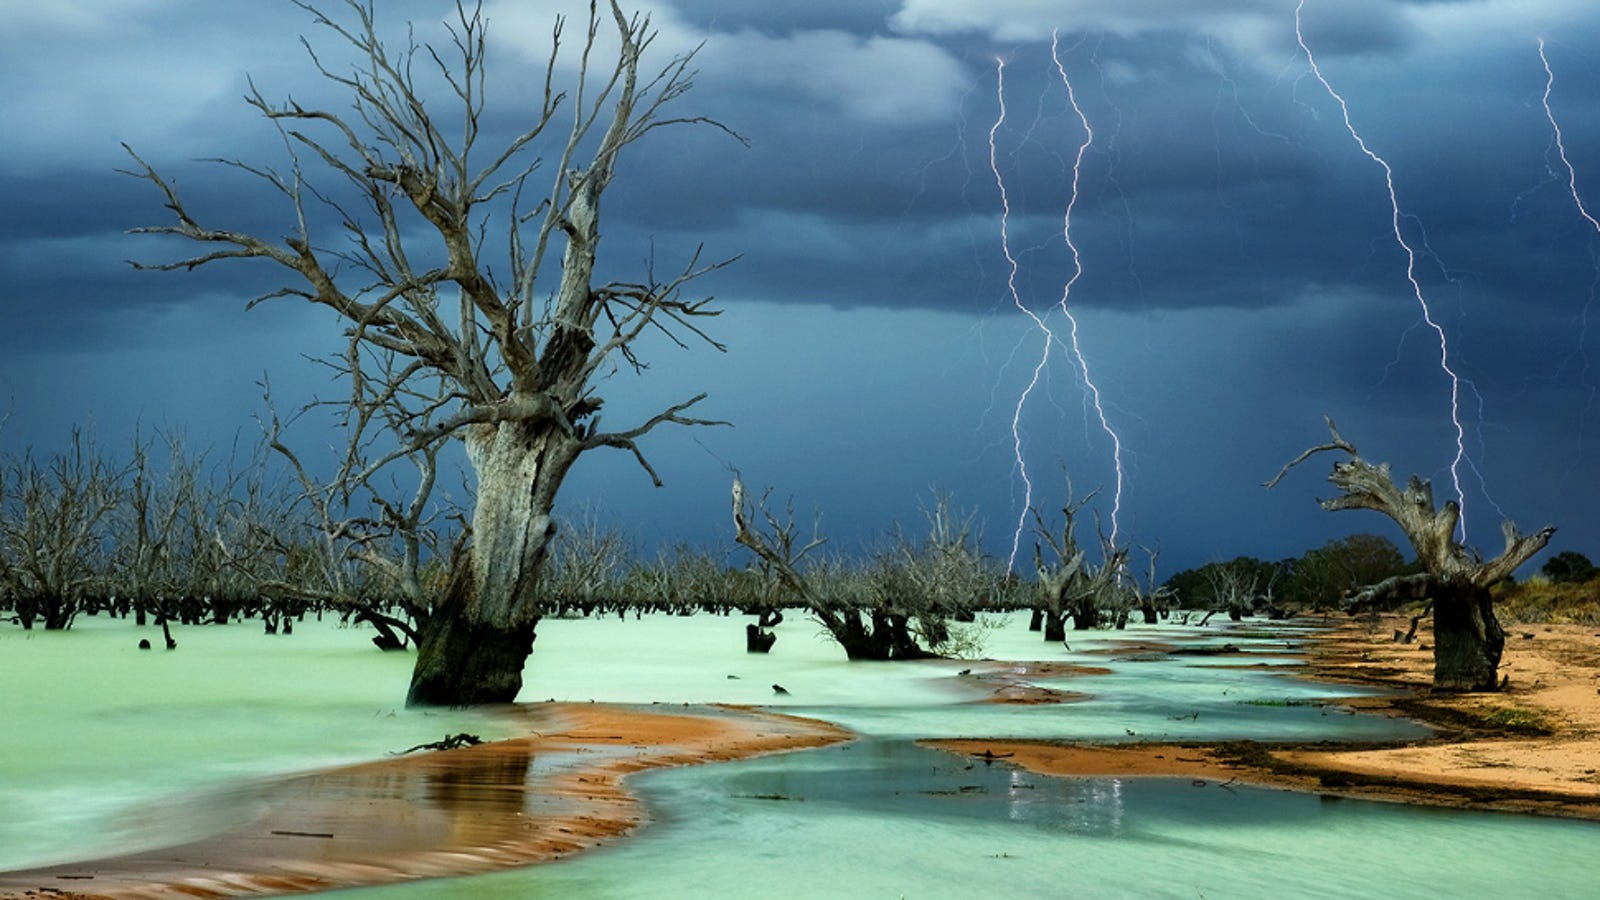 these-are-national-geographic-s-favorite-images-of-the-year